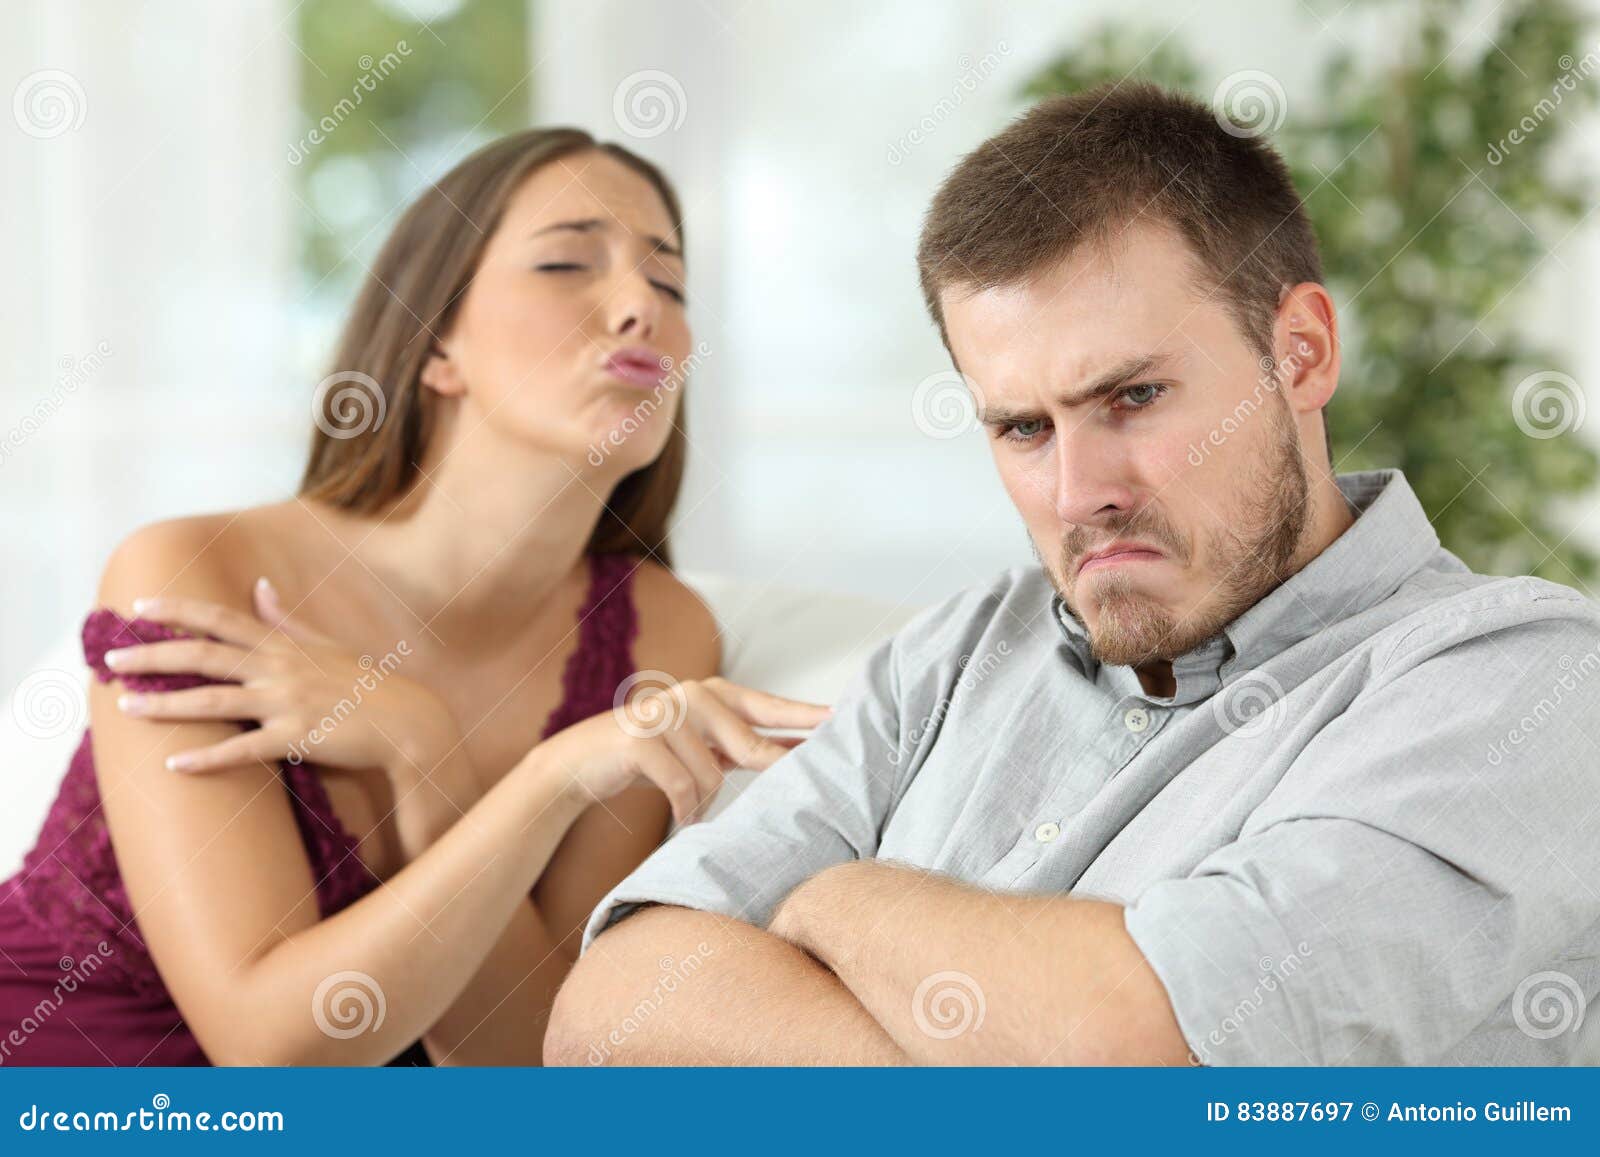 Angry Man Rejecting a Sex Offer from His Girlfriend Stock Image